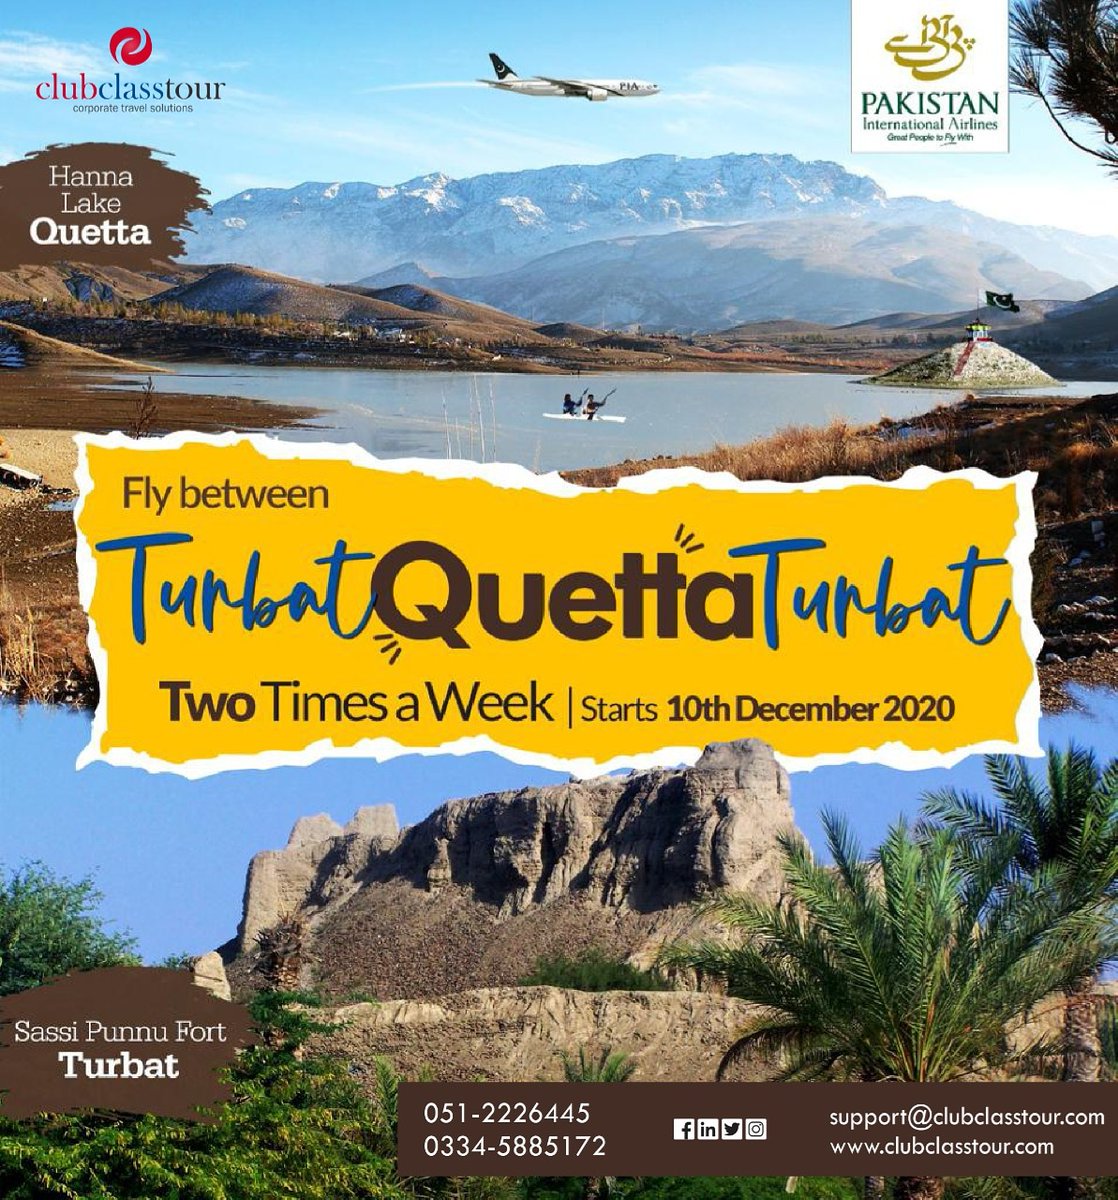 PIA flying between Turbat and Quetta, twice a week! 

Starting from 10th Dec2020.

For Booking & Assistance, Contact us.

+92 51 2226445
+92 334 5885172
support@clubclasstour.com

#ConnectingPakistan #PIA #FlyPIA #GreatPeopleToFlyWith #ClubClassTour